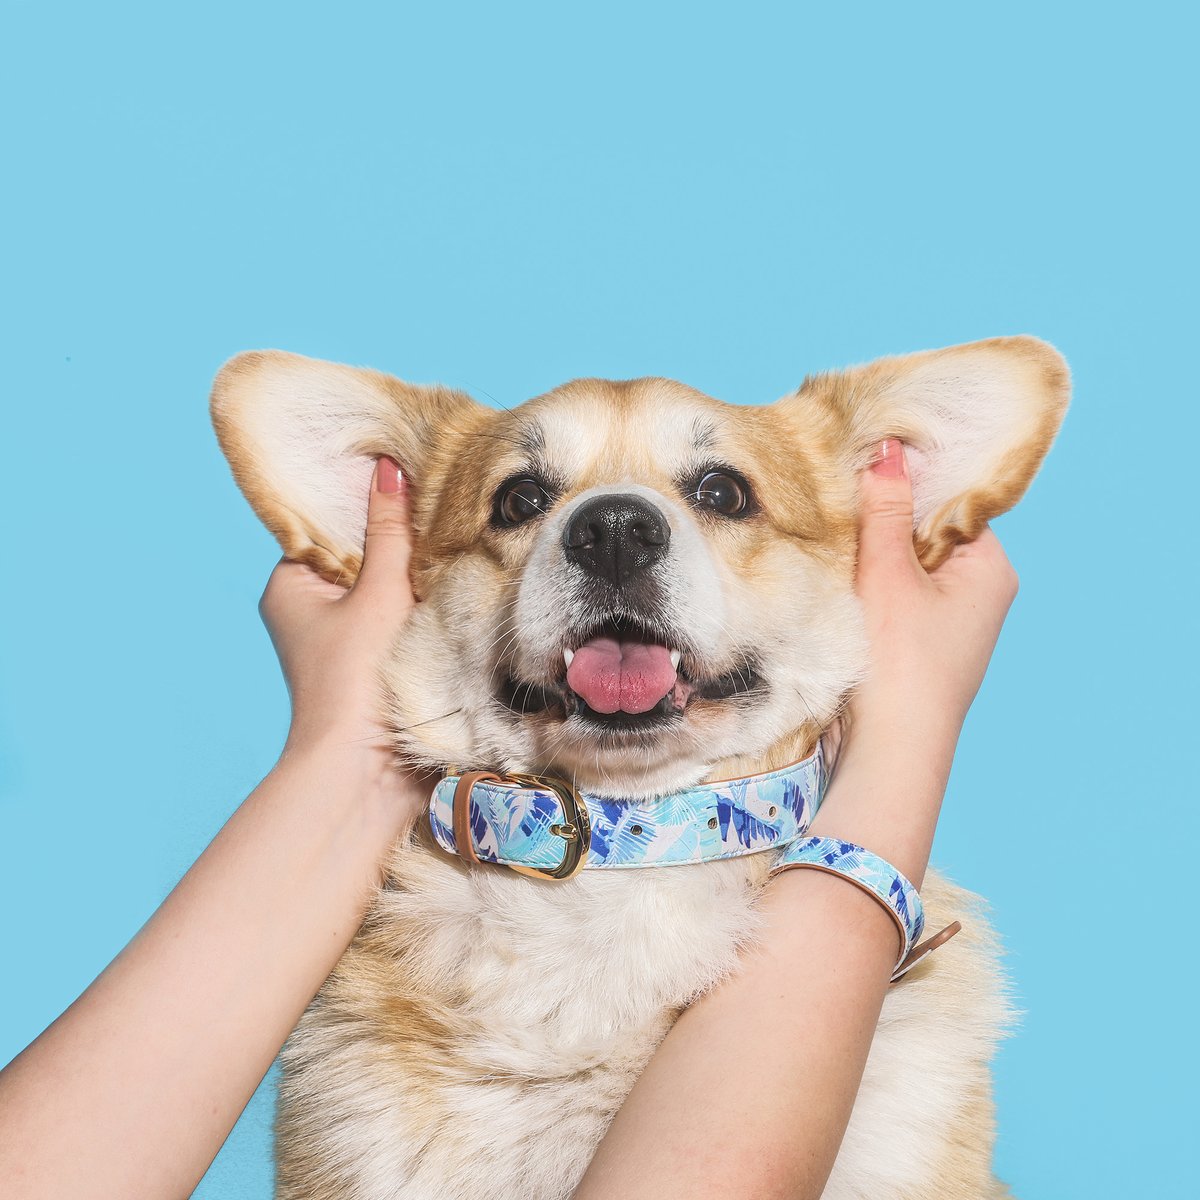 Tongue out, ears up, and all set to soak up some sunshine in my brand new FriendshipCollar #OneHotPup😎

#friendshipcollar #petcare #love #matching #besties #fashion #collar #woof #doglover #petstagram #mansbestfriend #dogfashion #dogs #dogaccessories #doglovers #dogmodel